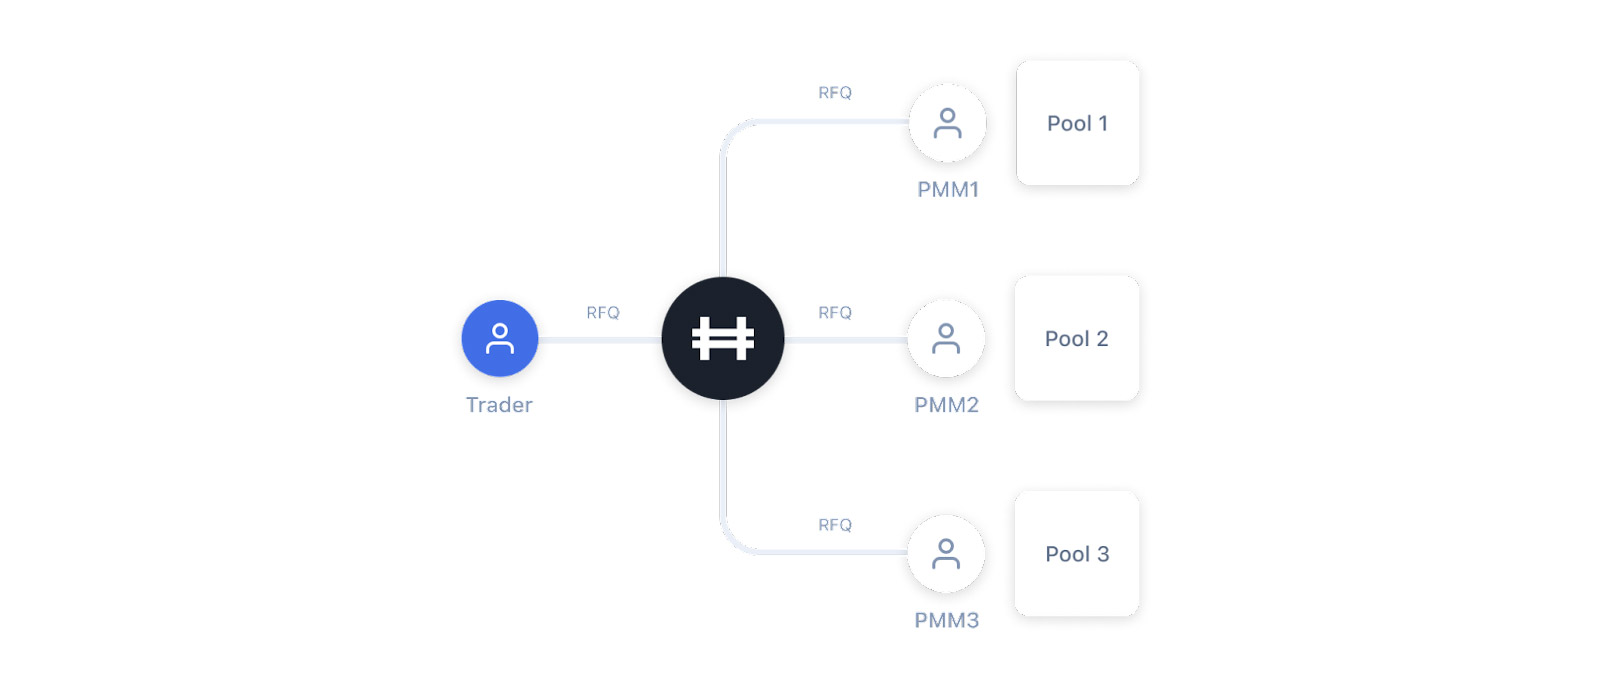 How the Hashflow project works